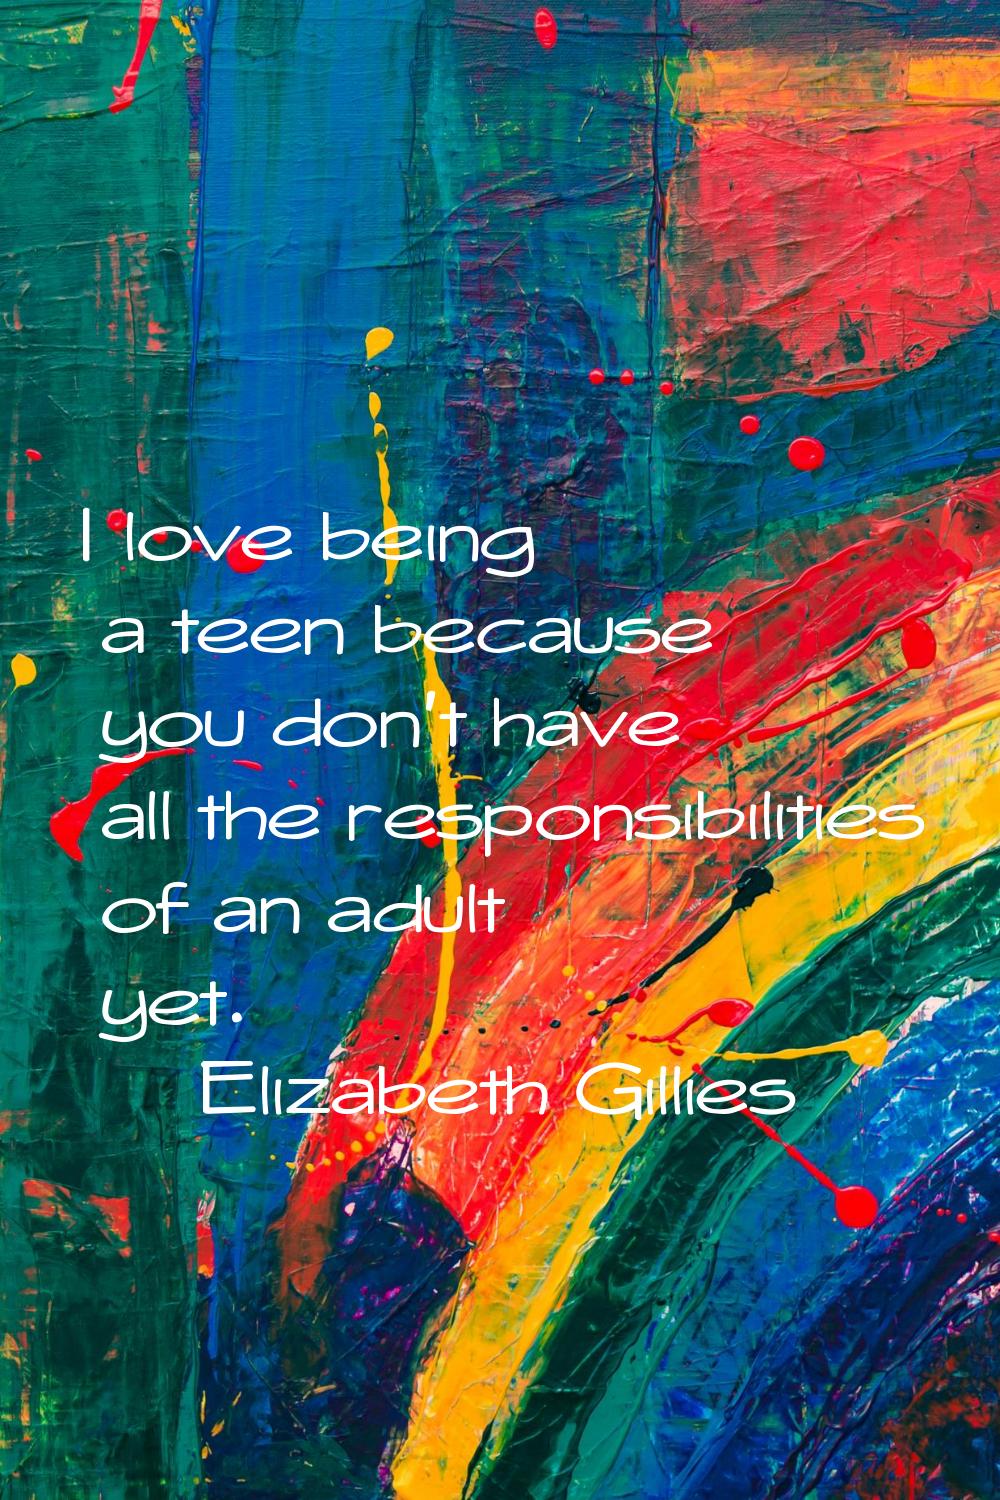 I love being a teen because you don't have all the responsibilities of an adult yet.